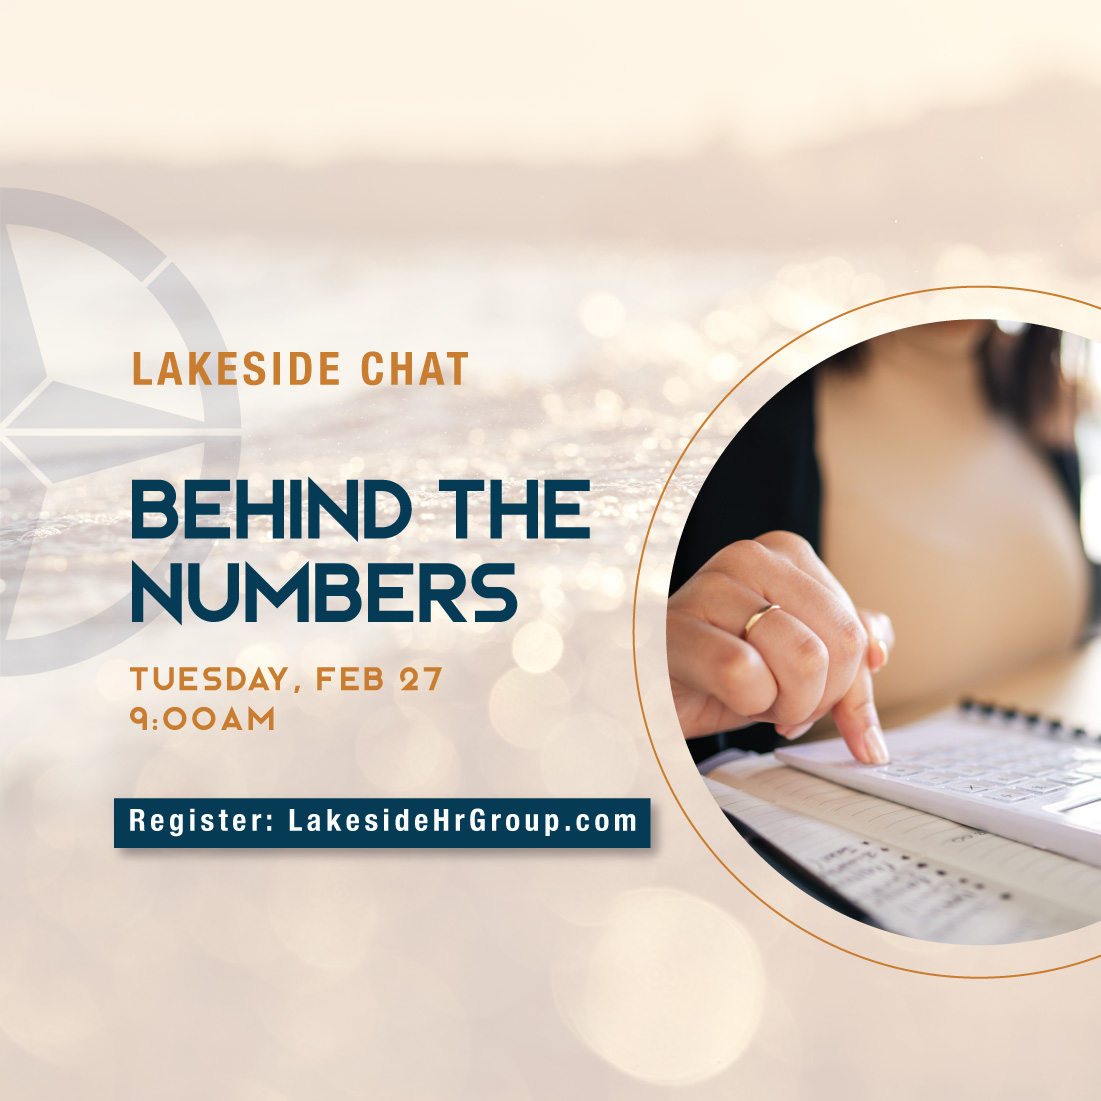 Lakeside Chats Invitation Graphic for Event